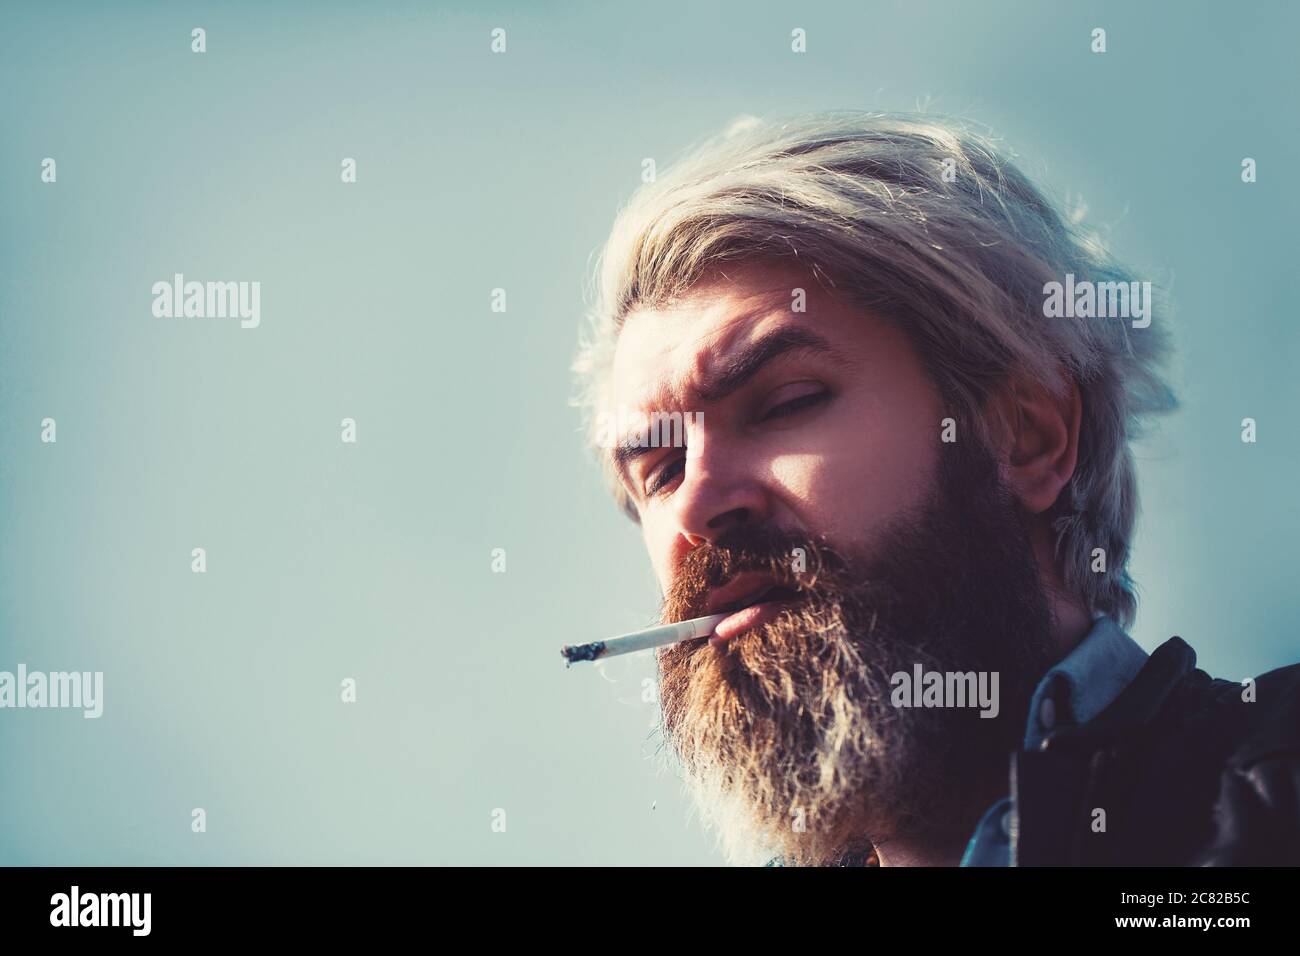 Serious bearded man smoking a cigarette on the beach. bearded hipster on the sky. Close-up portrait. Stock Photo